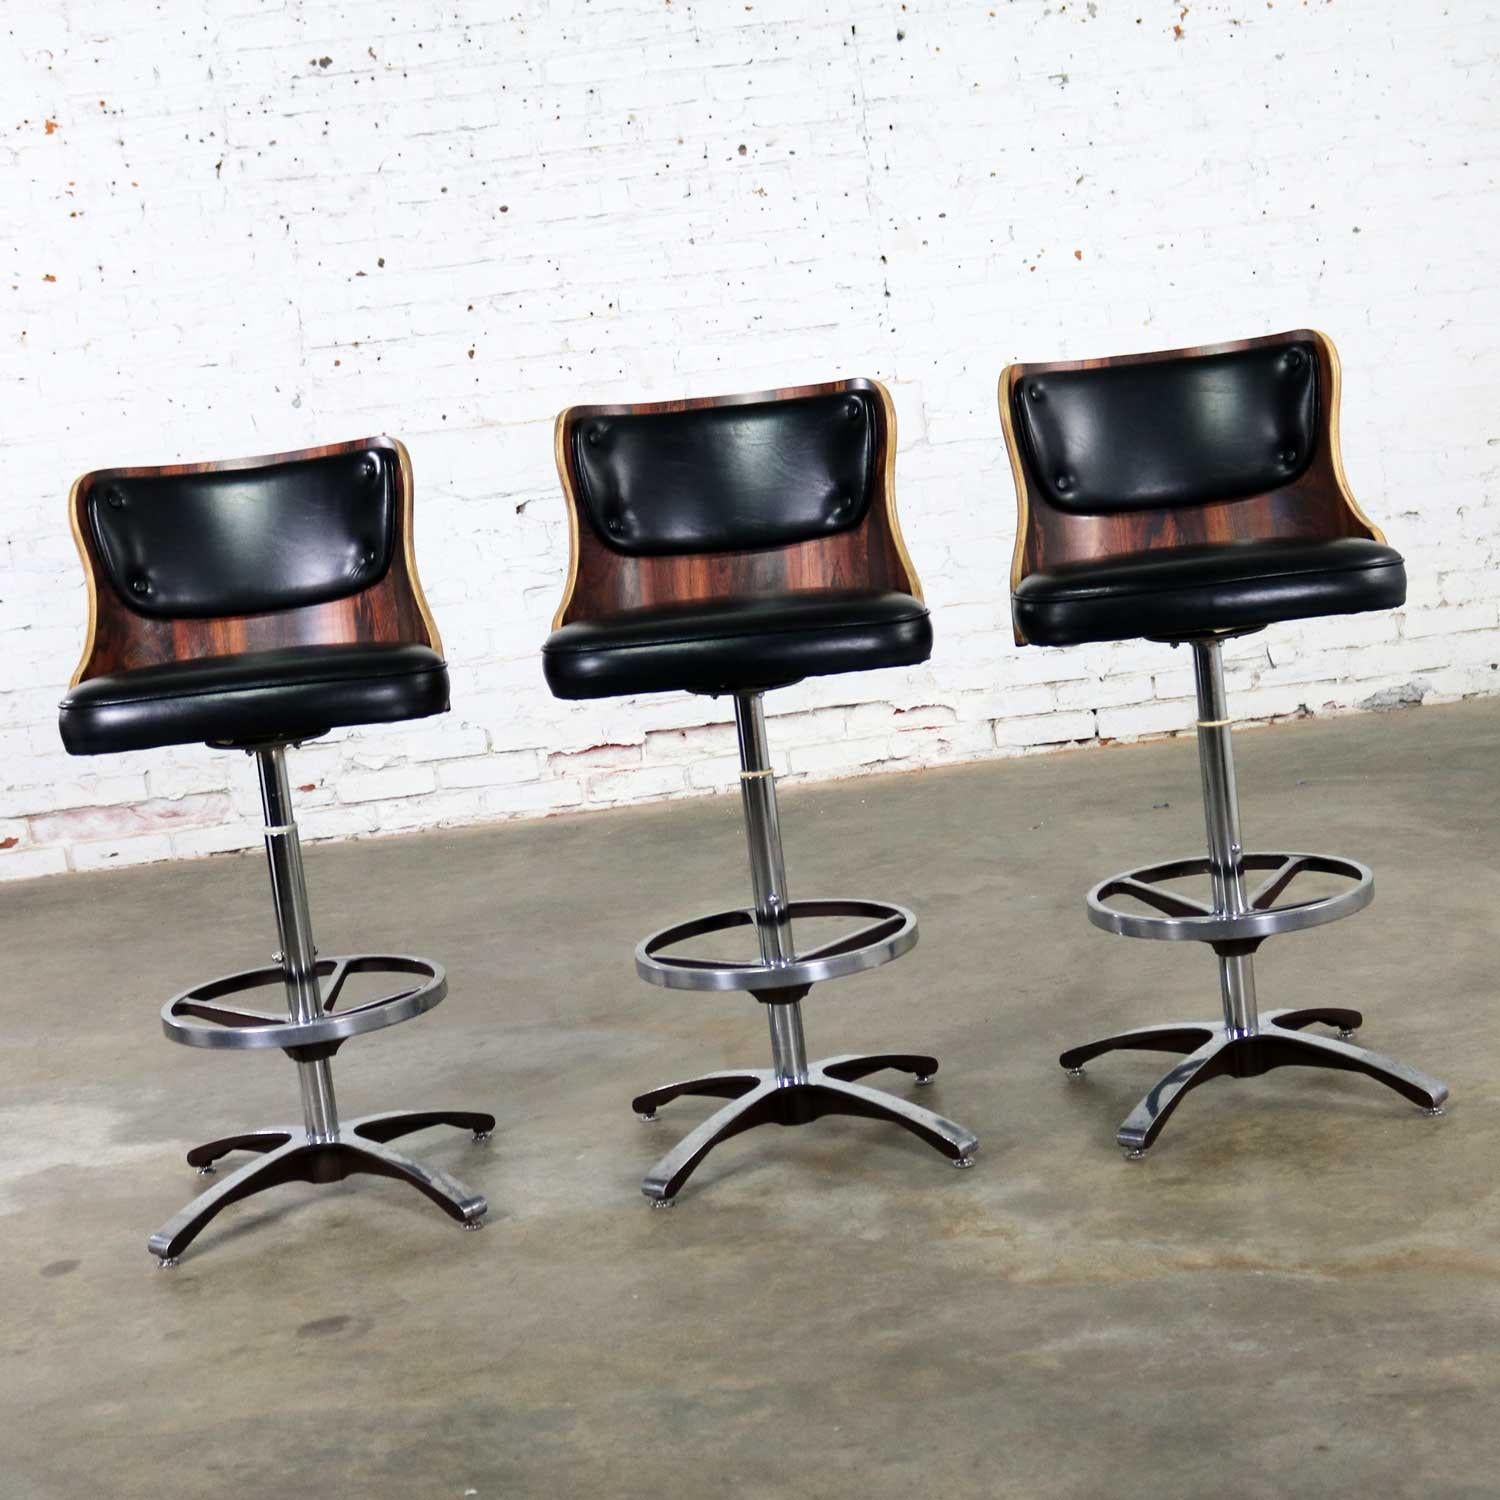 Handsome set of 3 vintage modern adjustable bar stools in laminate and black vinyl with chrome and cast aluminum bases by Daystrom. These stools adjust from bar height to counter height and swivel 360 degrees. They are in overall wonderful vintage